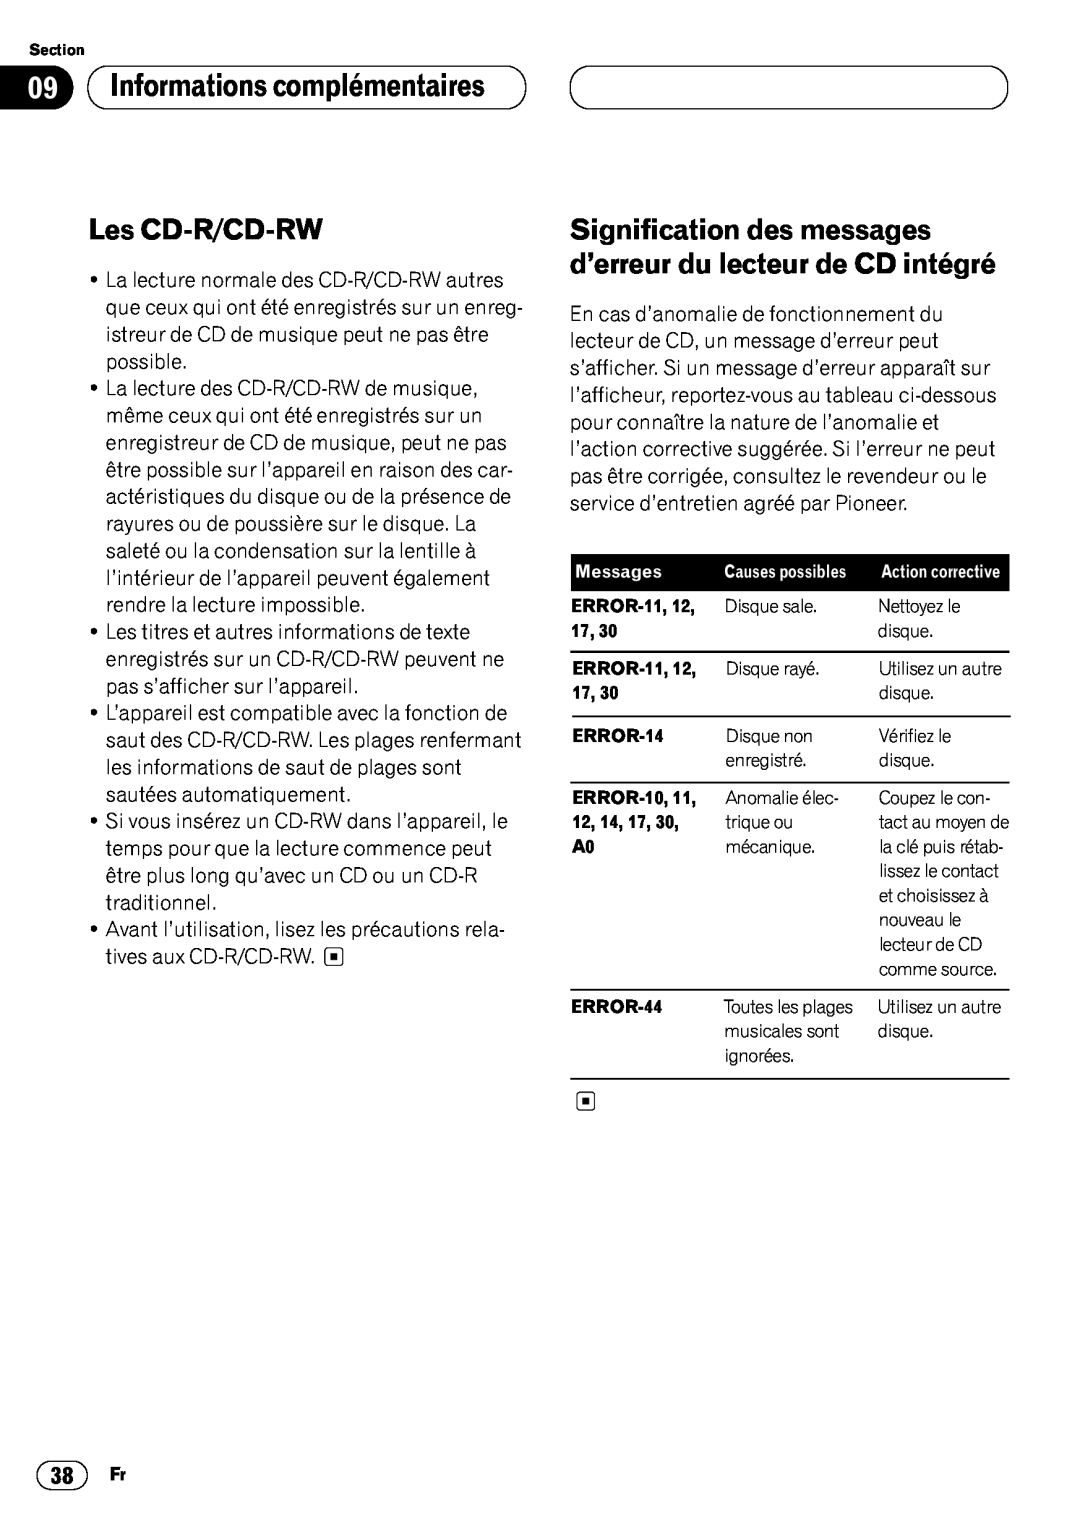 Pioneer DEH-P6400 operation manual 09Informations complémentaires, Les CD-R/CD-RW 